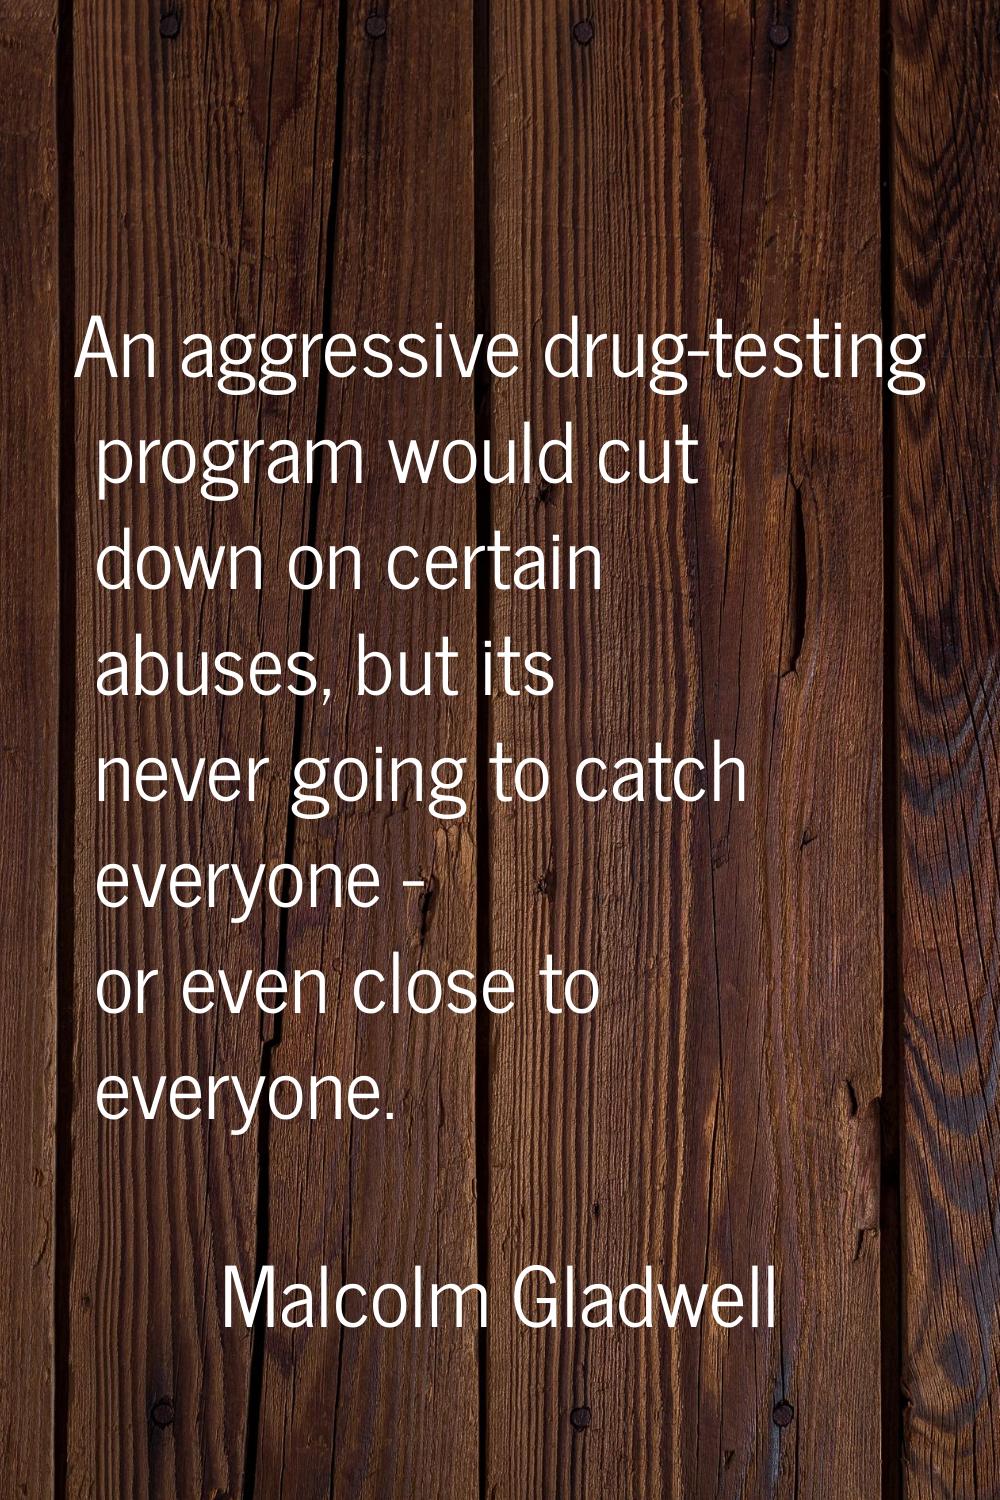 An aggressive drug-testing program would cut down on certain abuses, but its never going to catch e